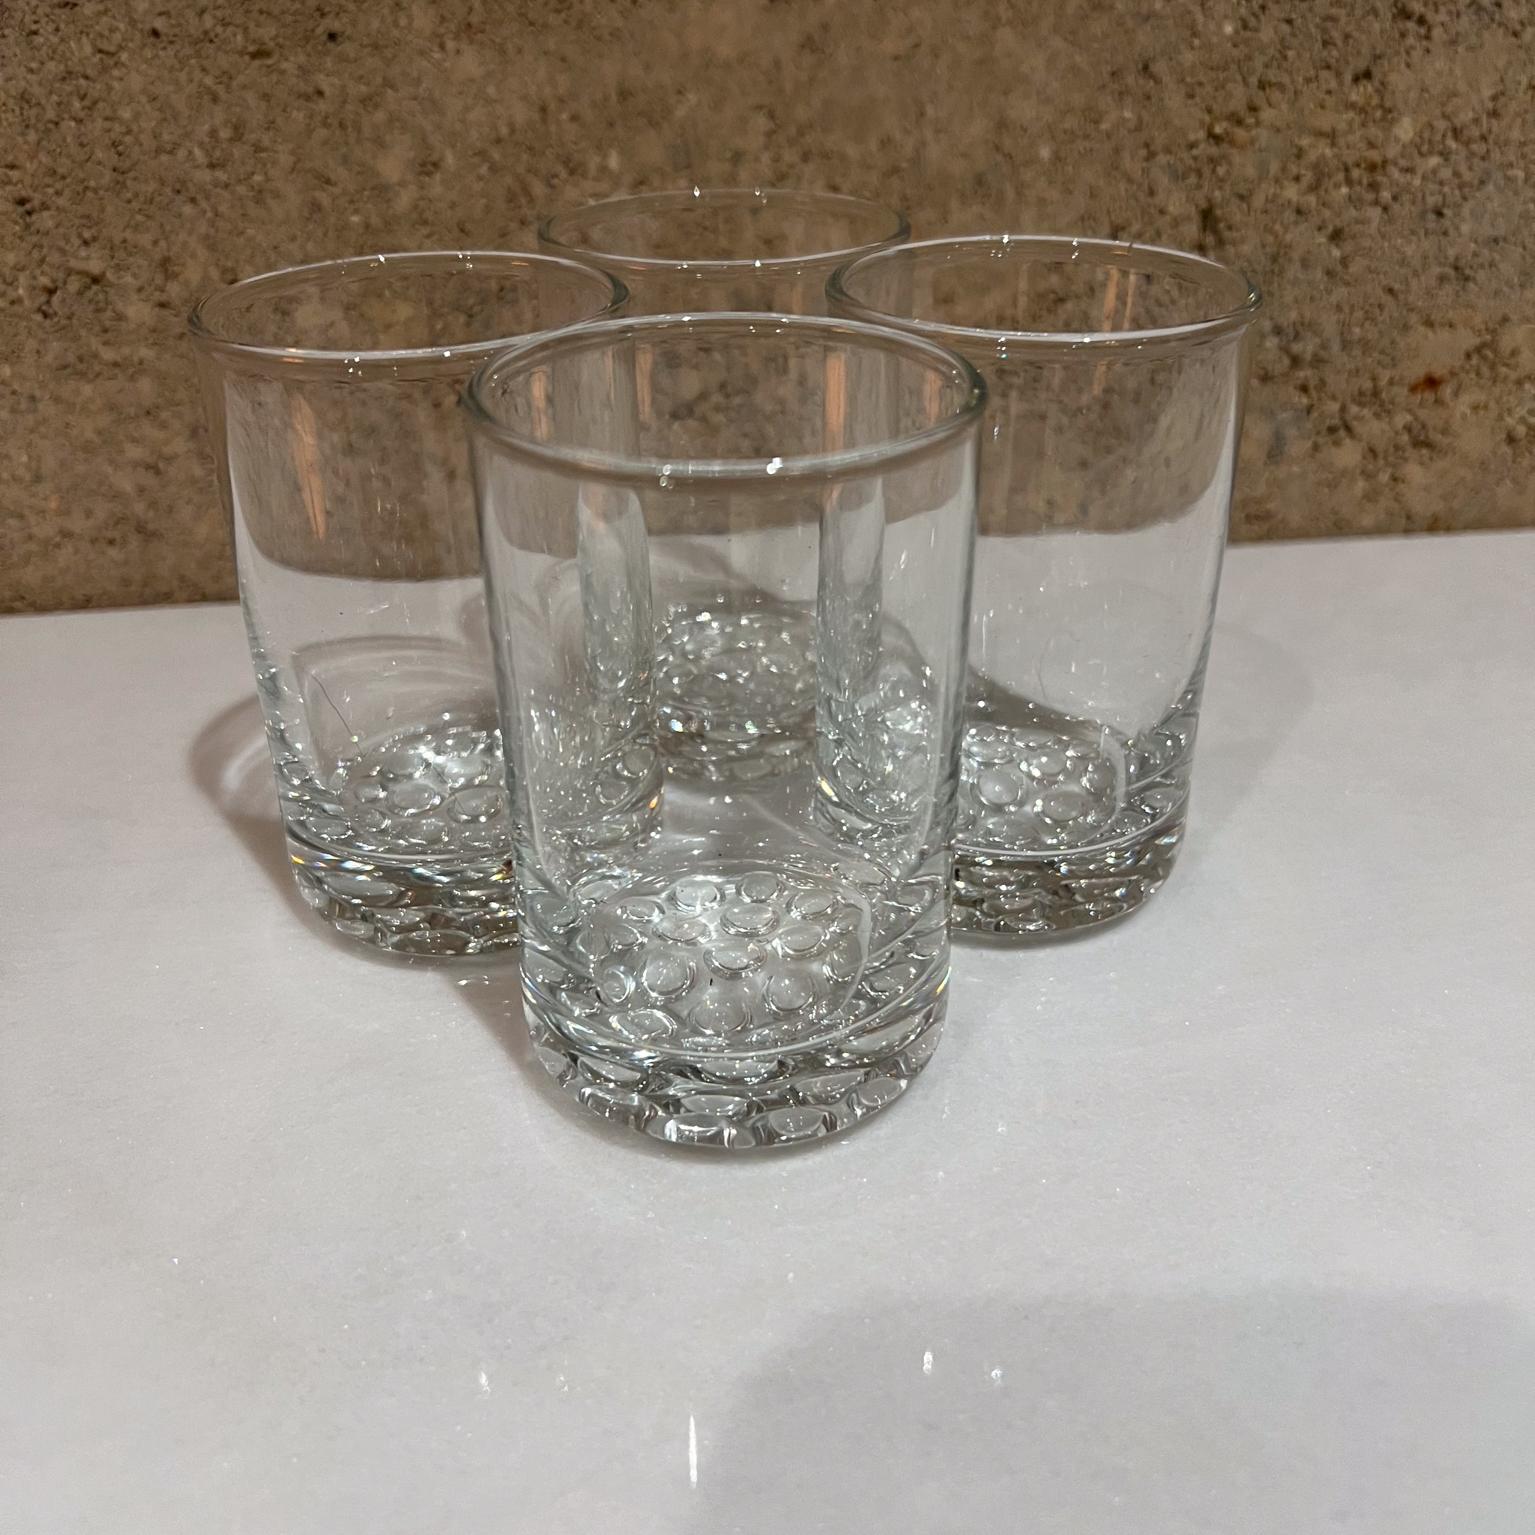 1970s Set of Four Drink Glasses Juice or Whiskey Barware In Good Condition For Sale In Chula Vista, CA